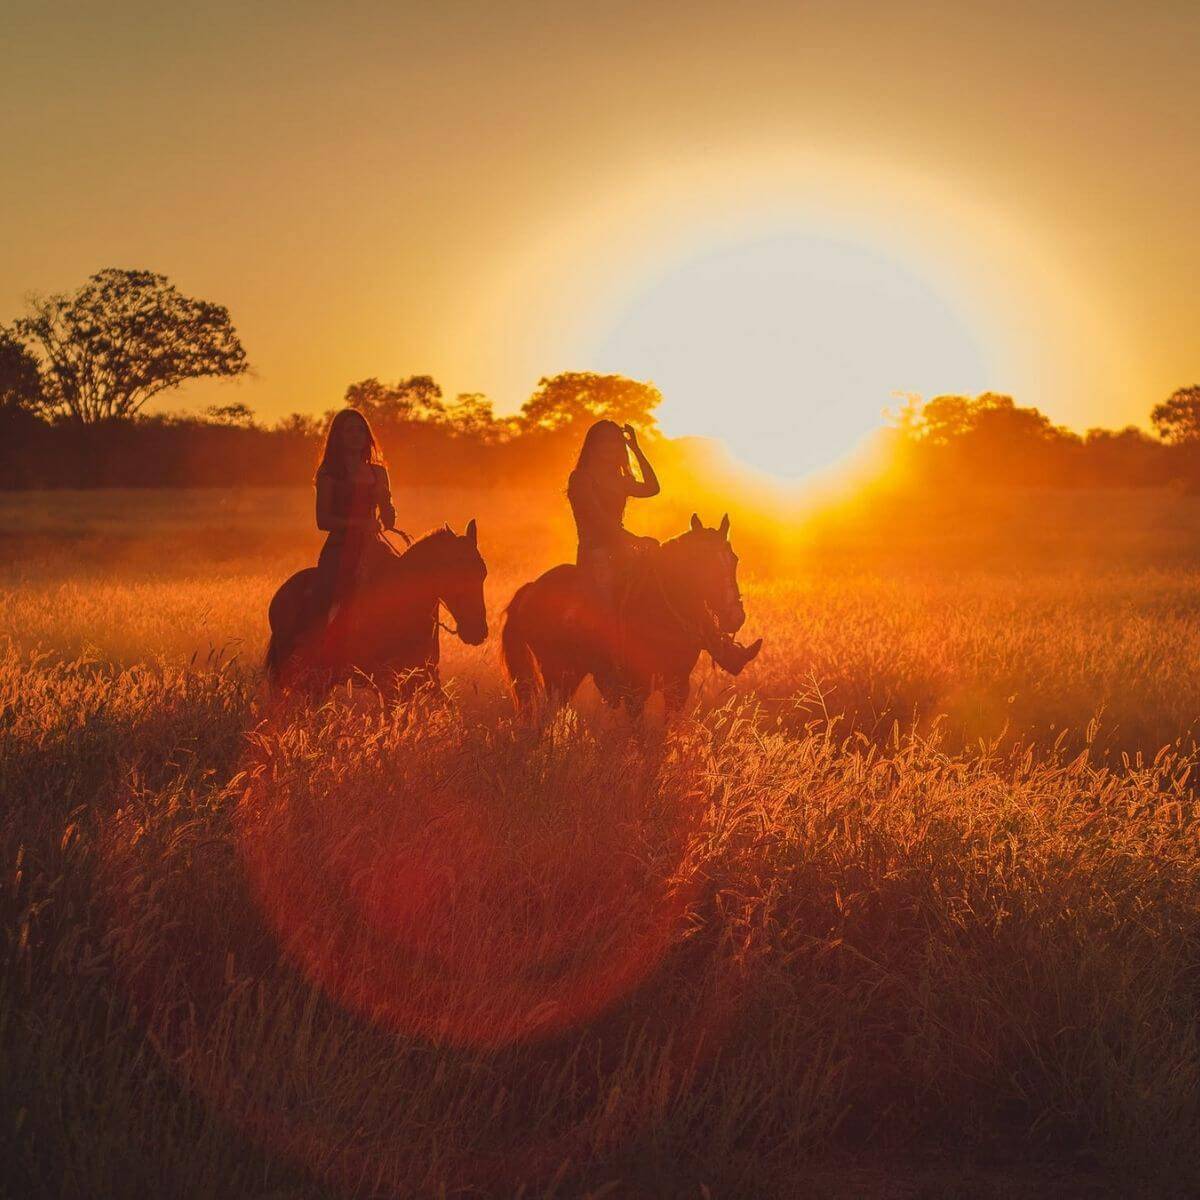 Silhouette of two people riding horses during a sunset.